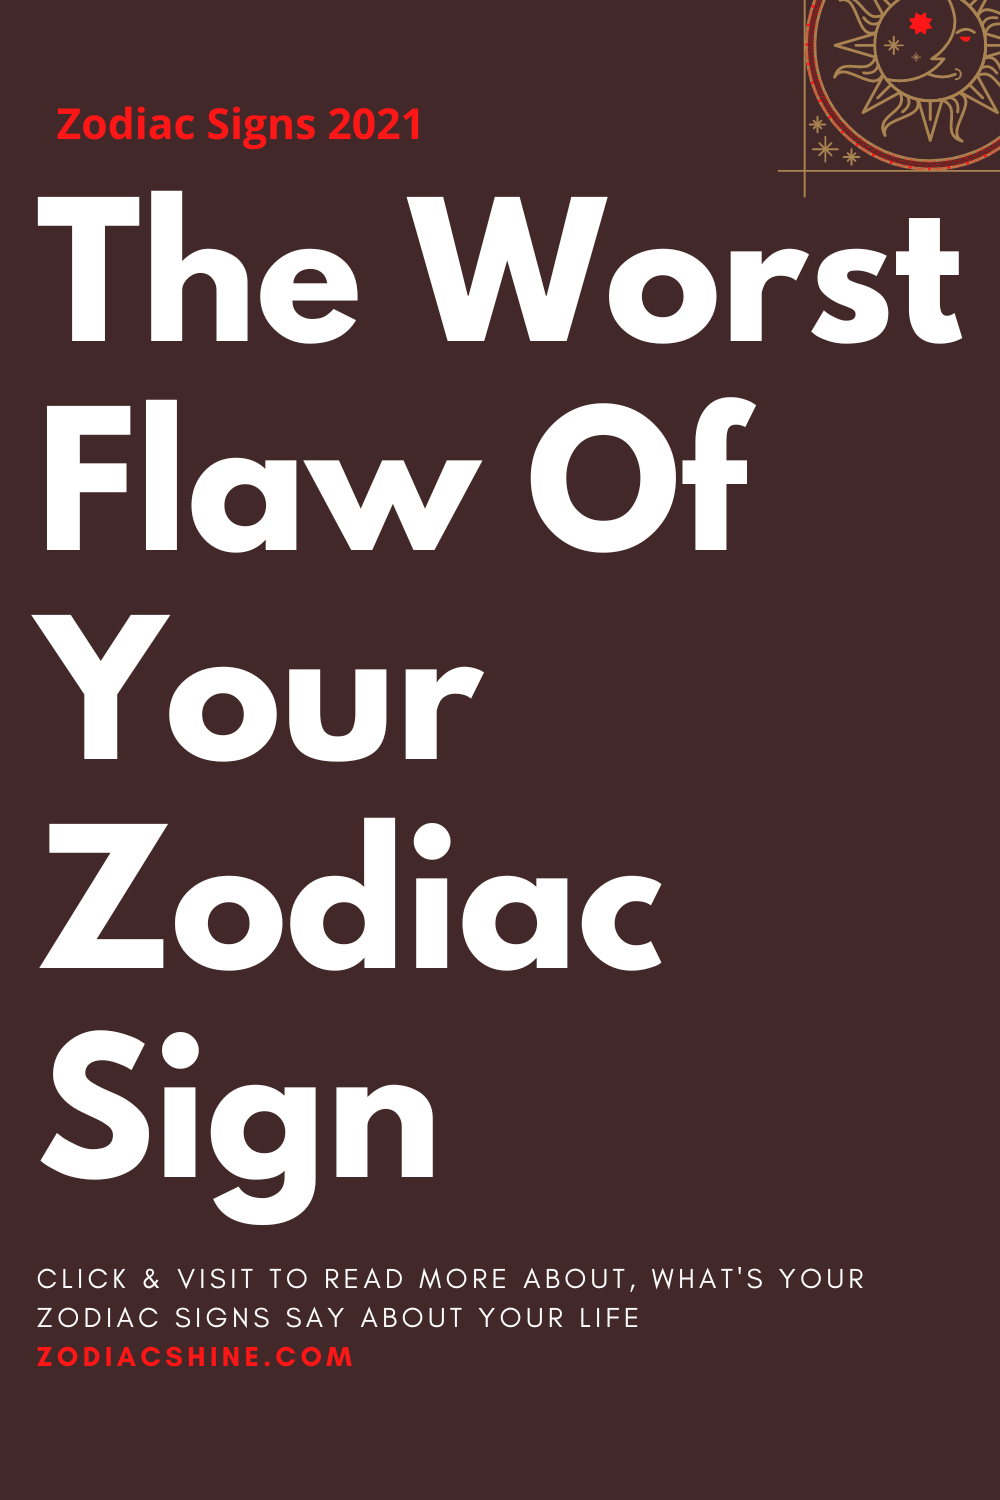 The Worst Flaw Of Your Zodiac Sign